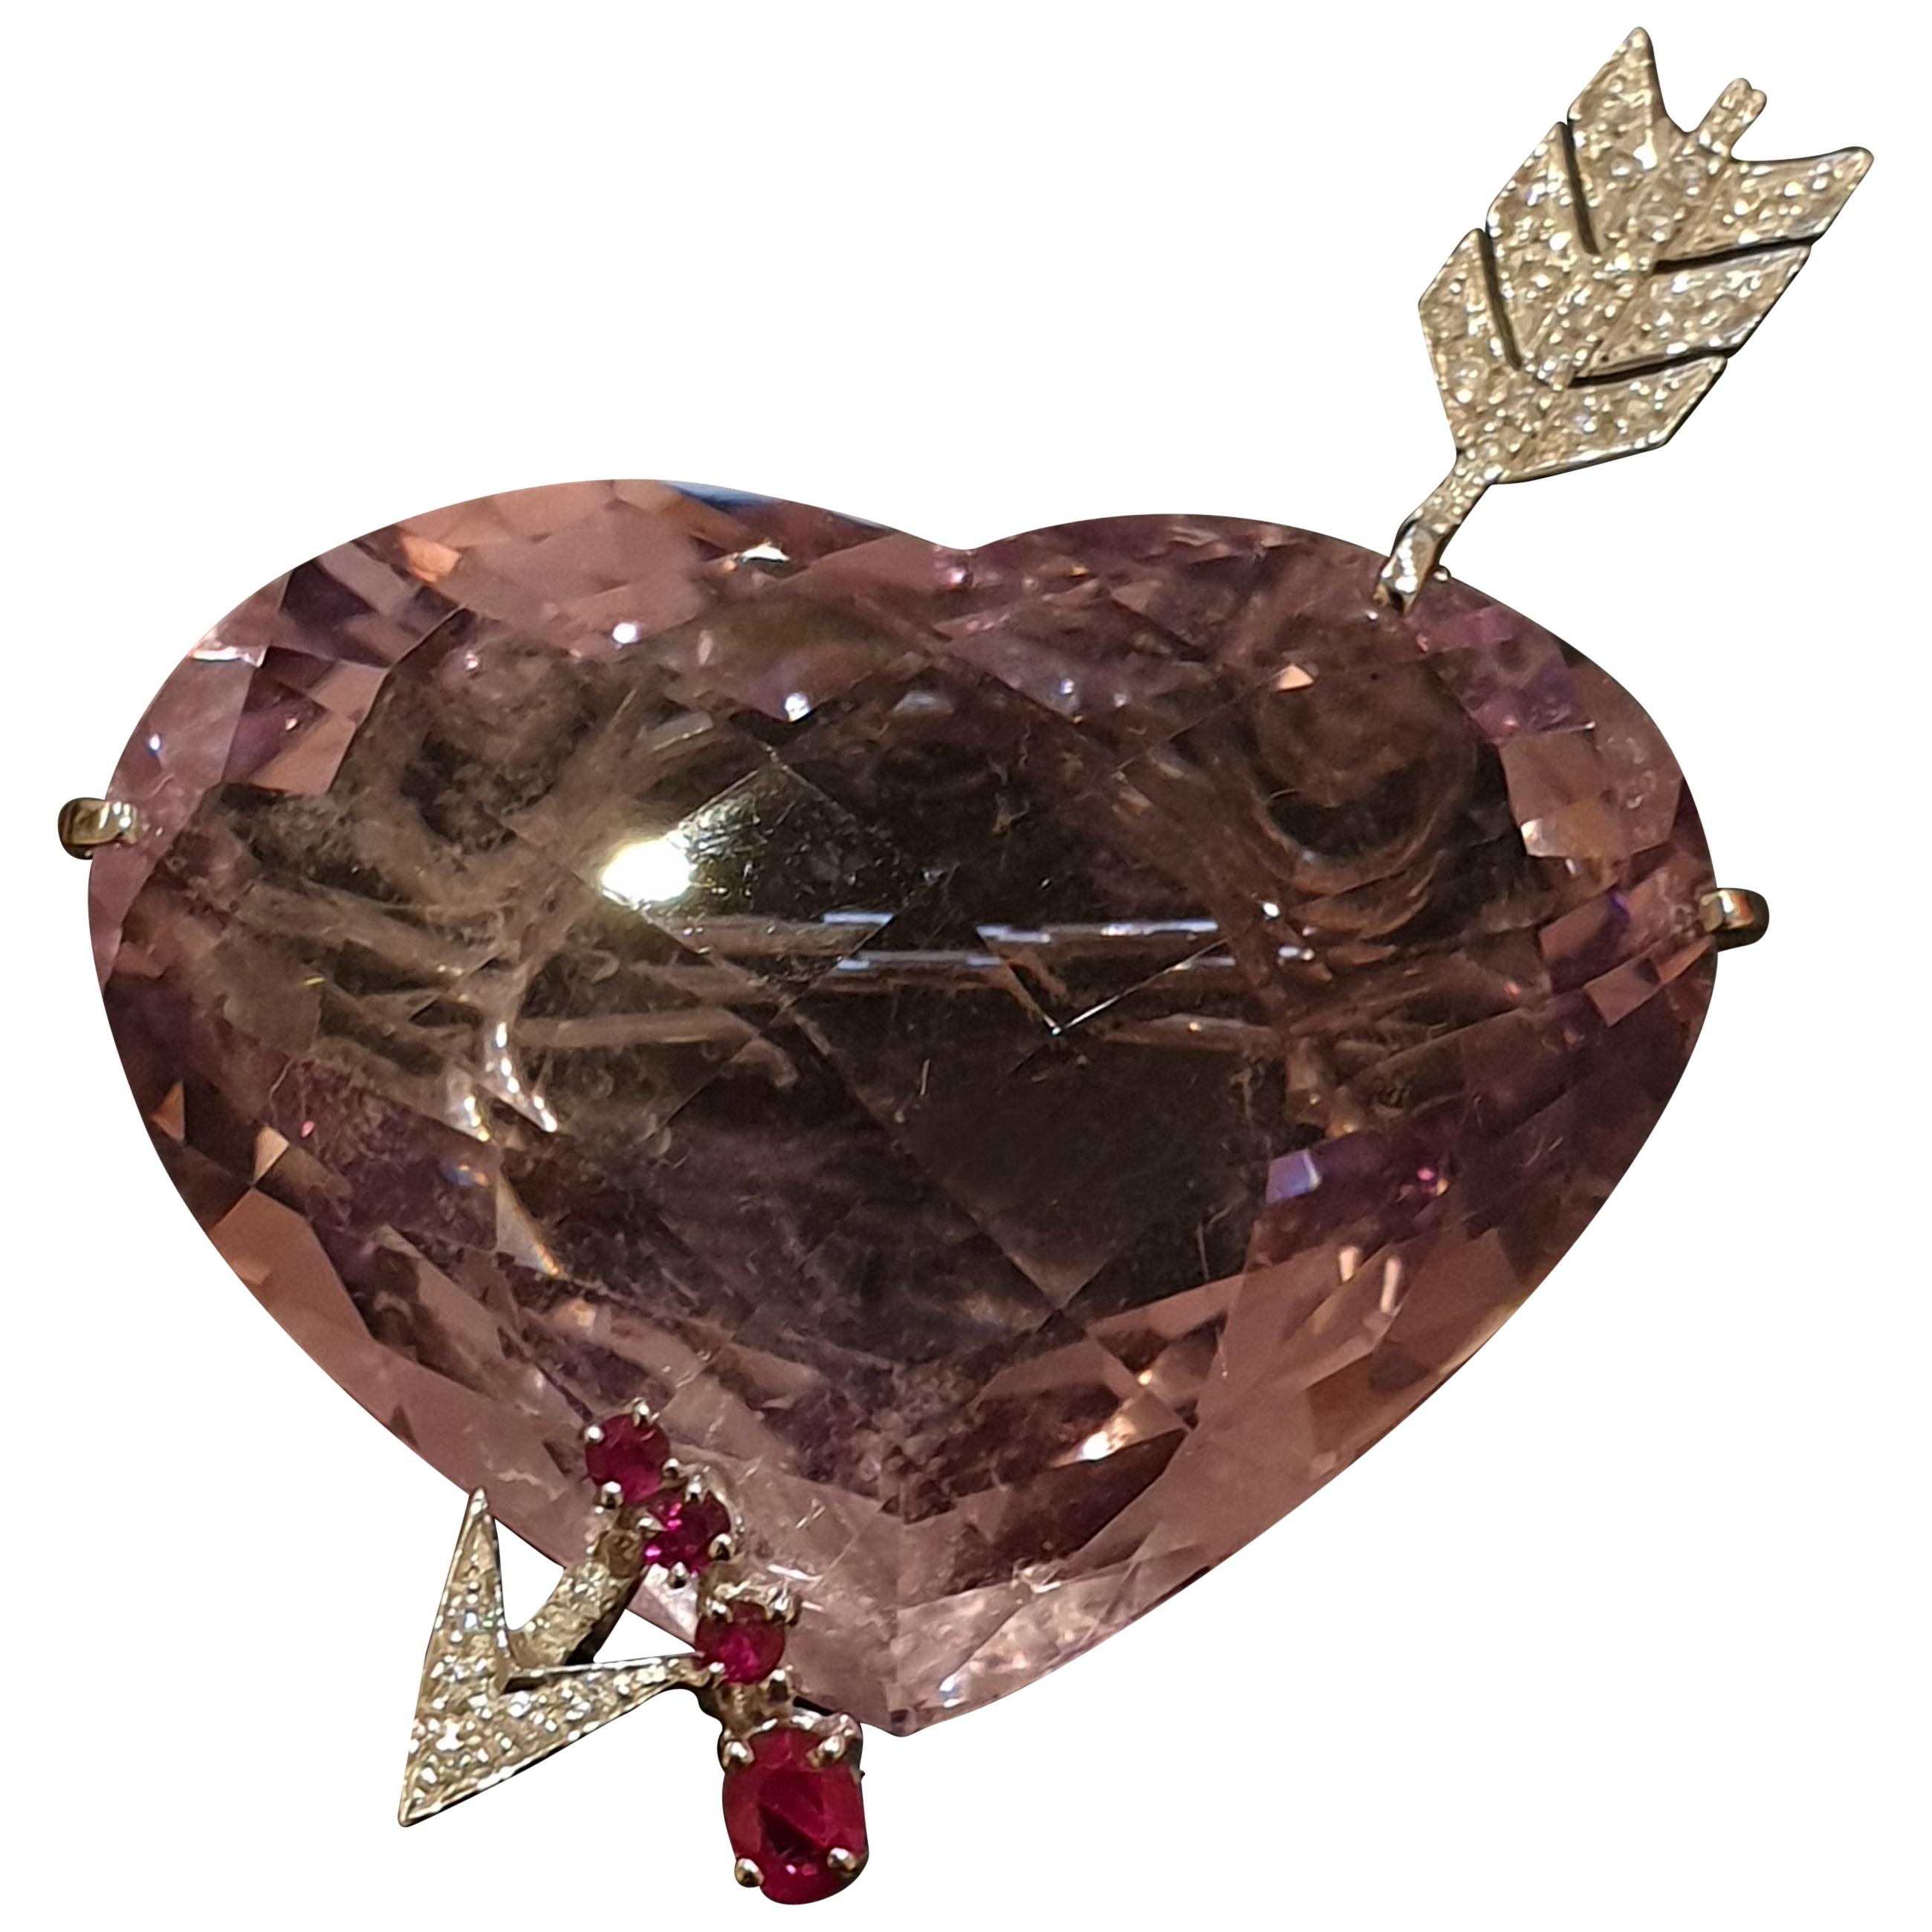 Amethyst Gold Brooch in the Form of a Pierced Heart with Diamonds and Rubies